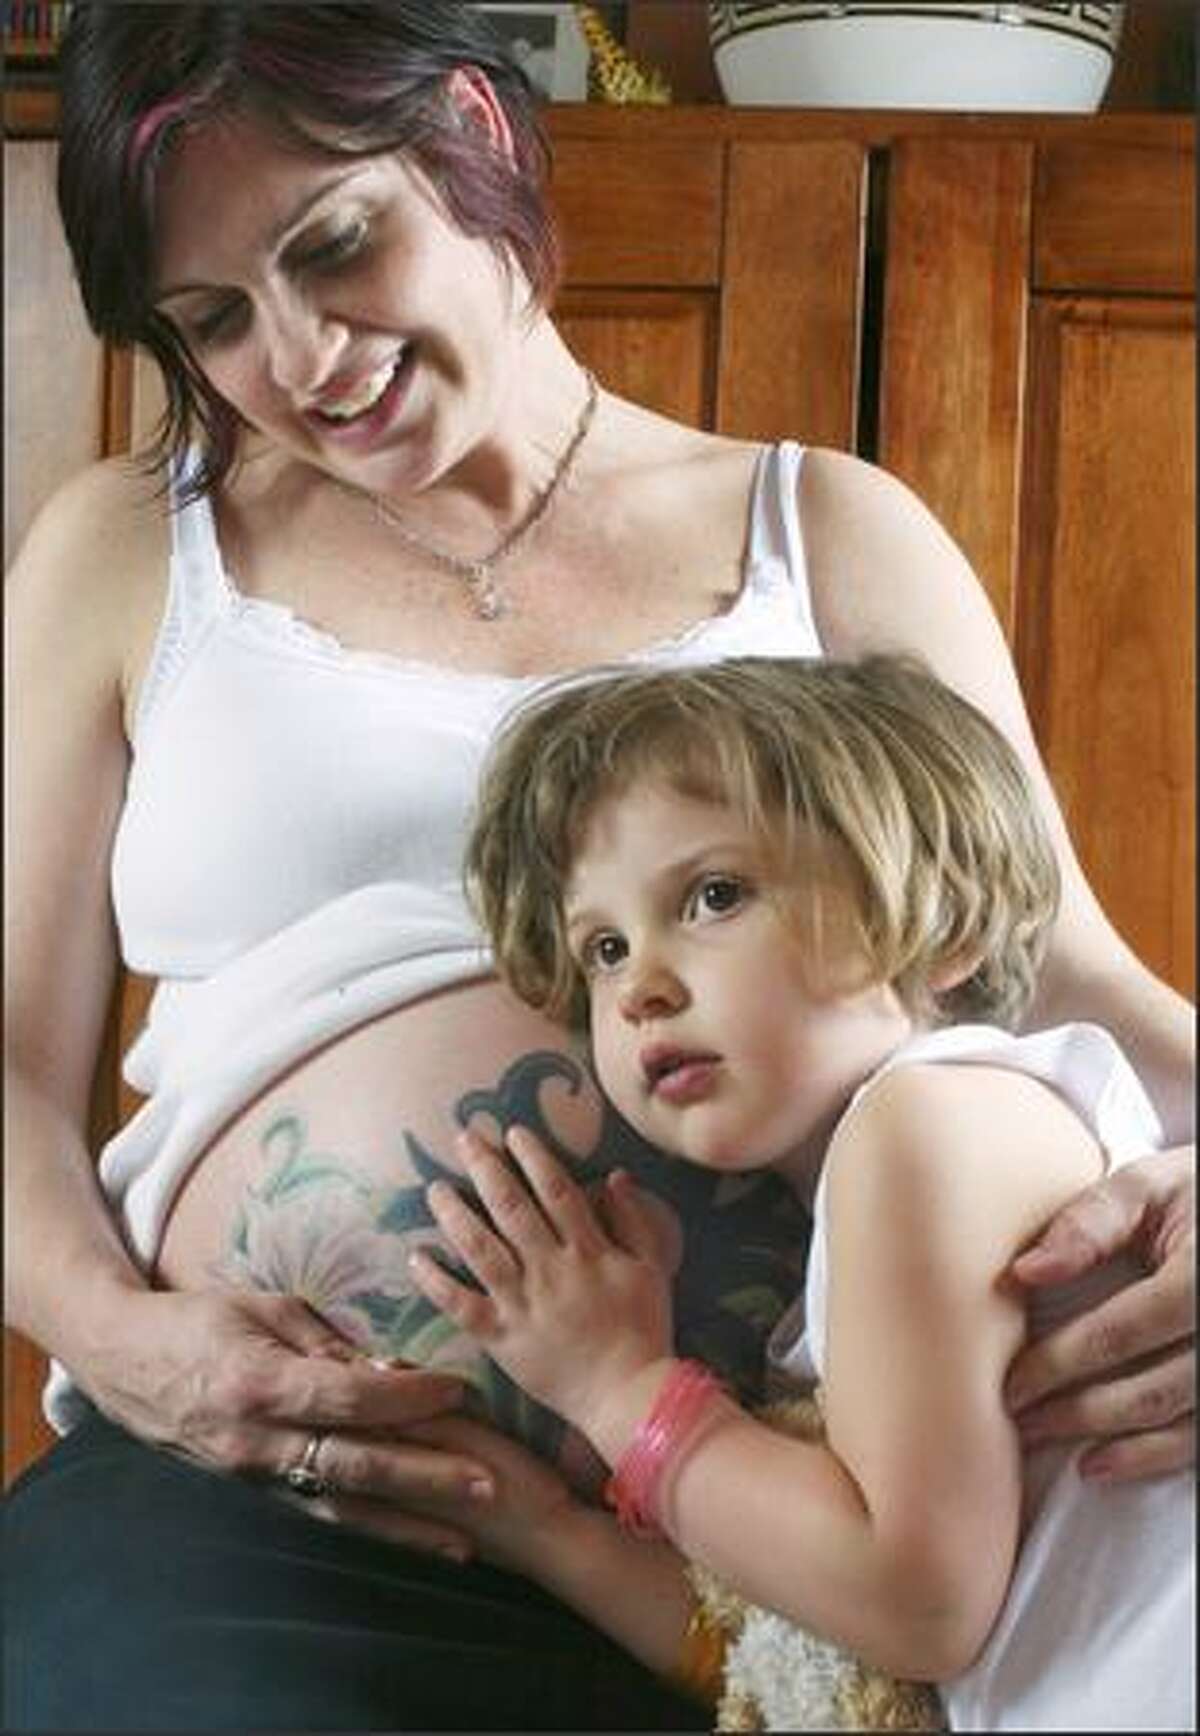 Sadie Botuchis, 3, listens for signs of life on mom Kristin Botuchis' tattooed belly in their Seattle home. Becoming a mom was a transition for Botuchis, who used to go out every weekend to clubs all around town.